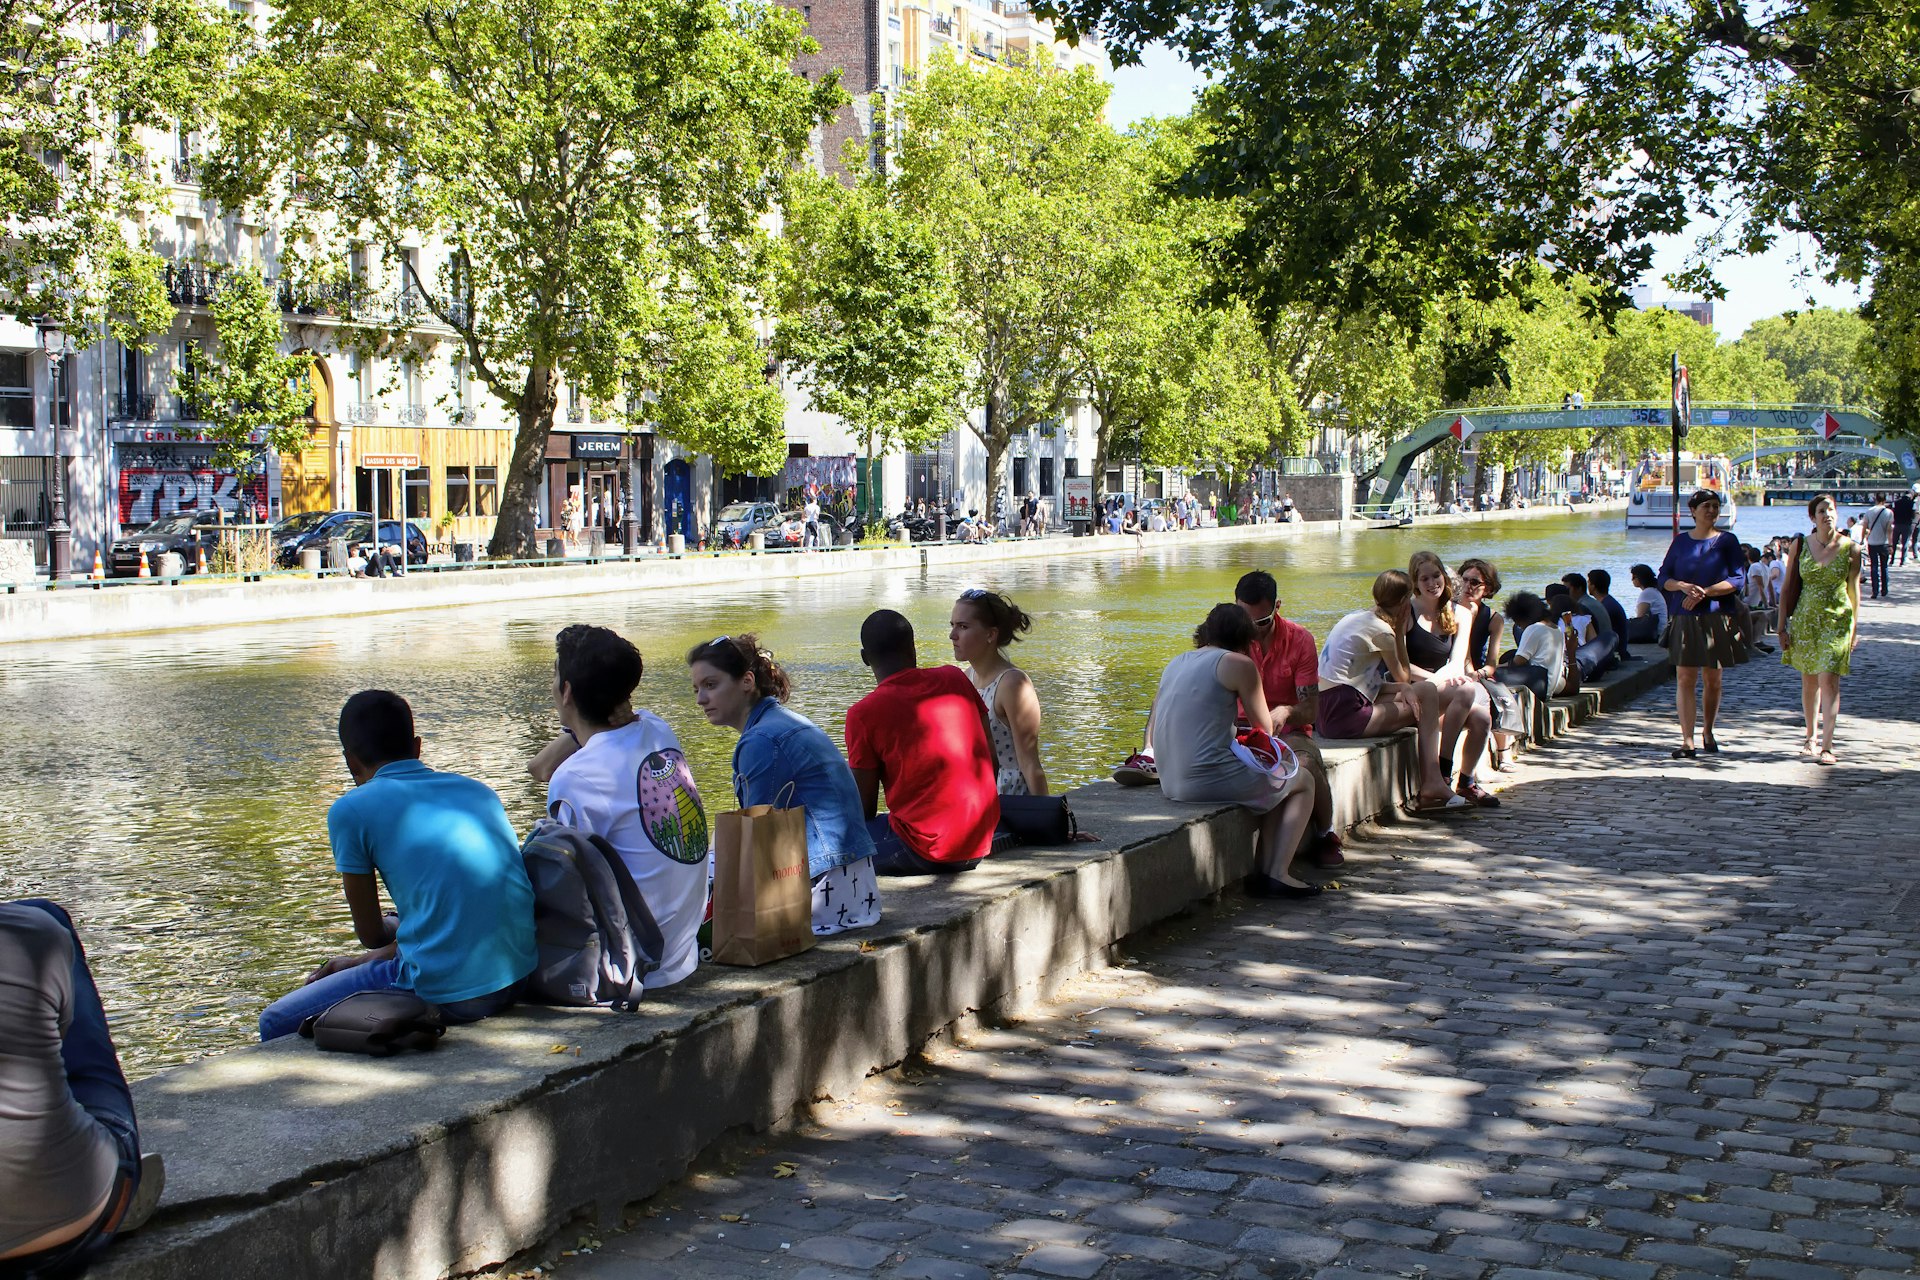 People hang out by Canal Saint Martin under trees in Paris